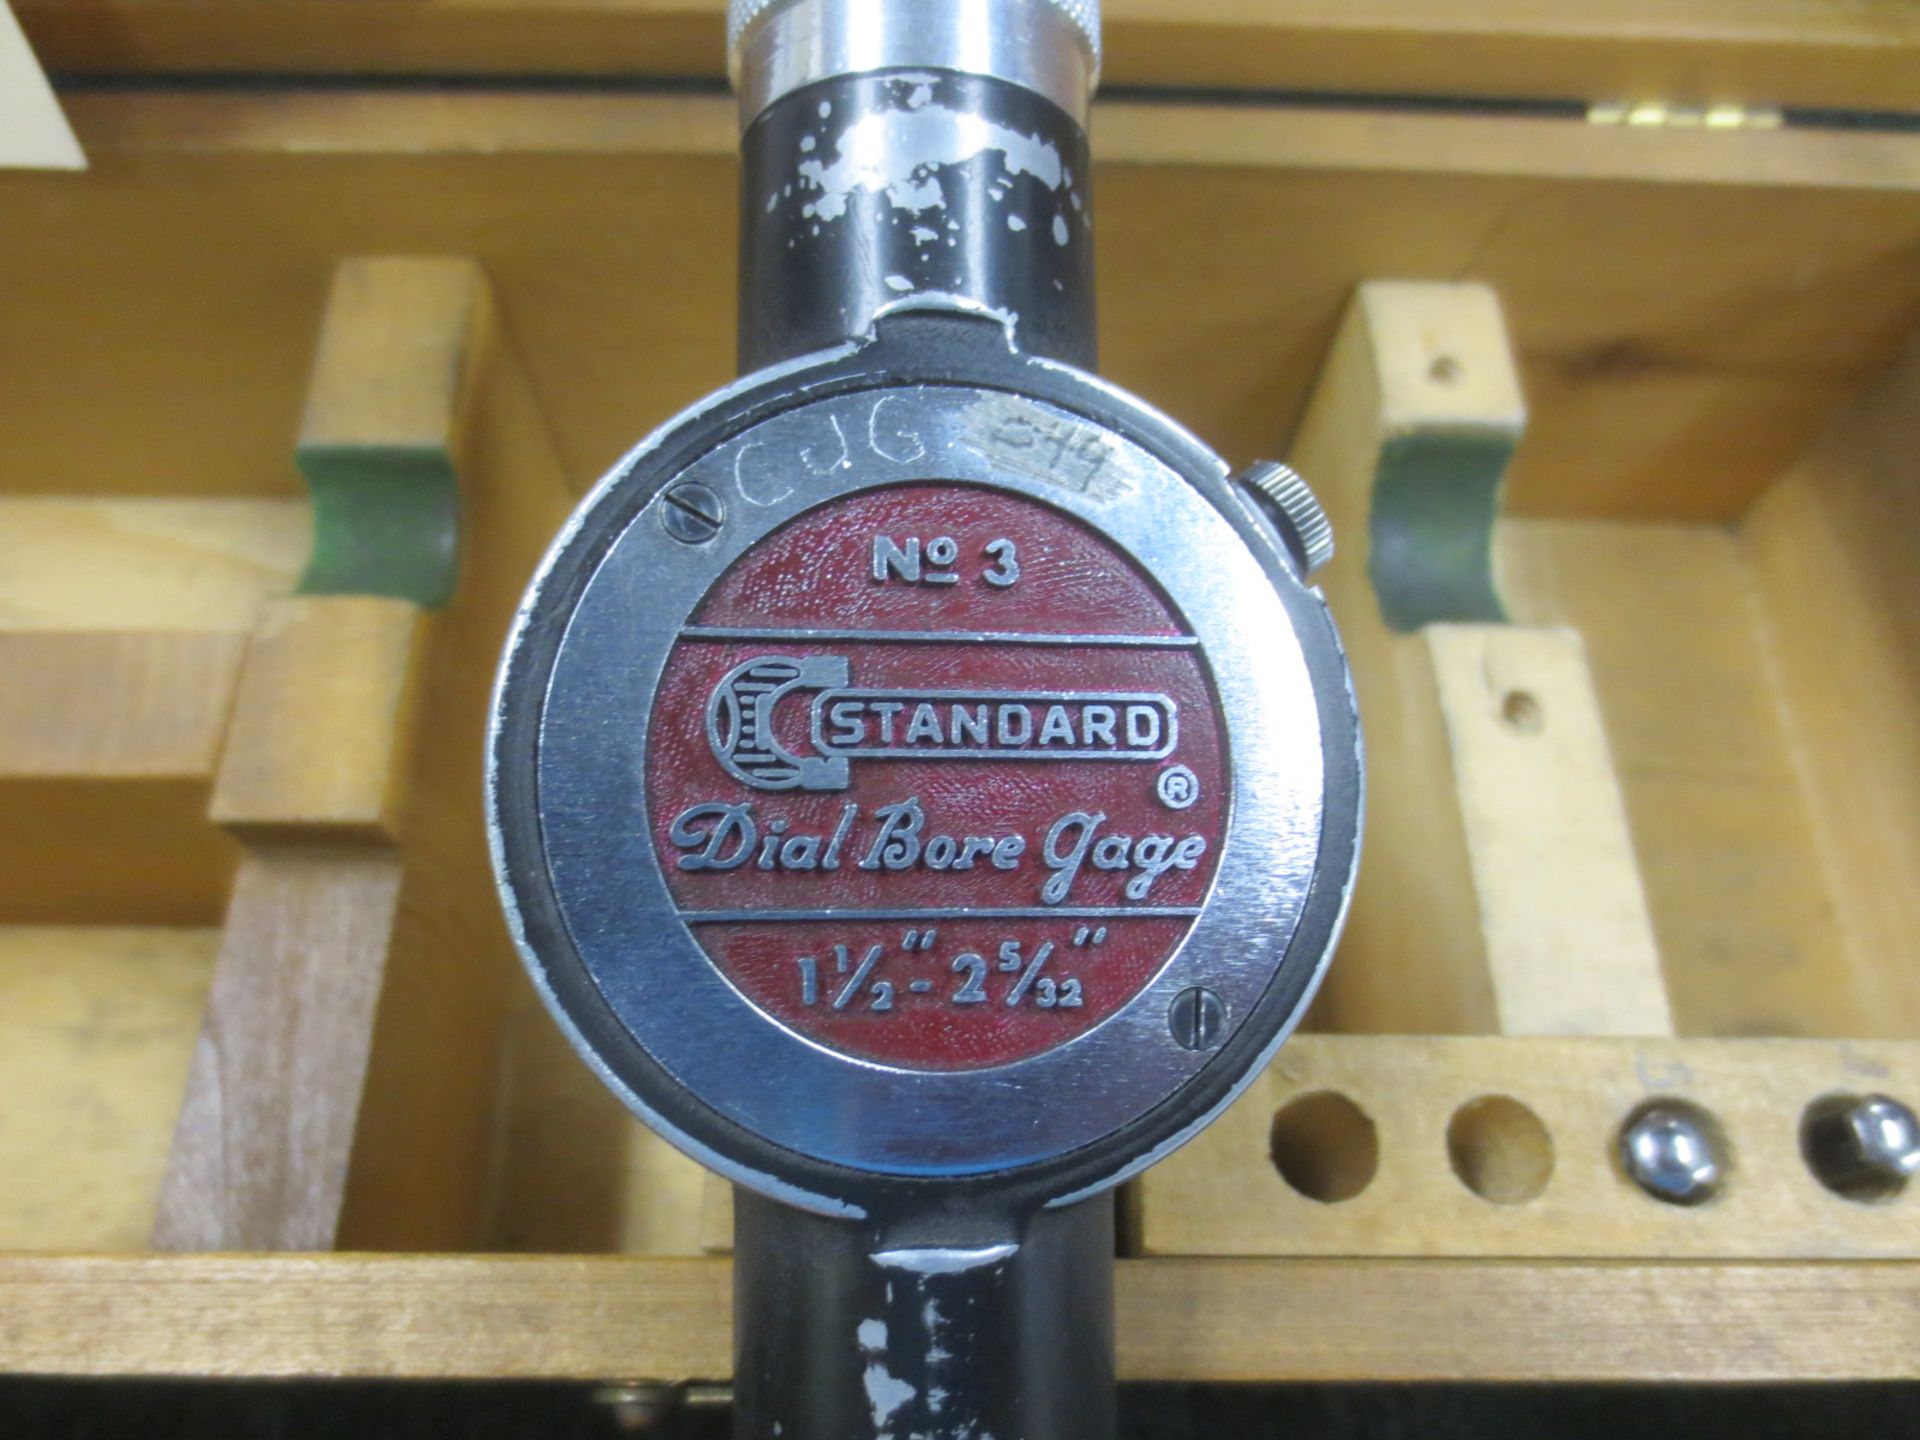 Standard Dial Bore Gage, No. 3, 1 1/2'' - 2 5/32'', With Case - Image 2 of 2